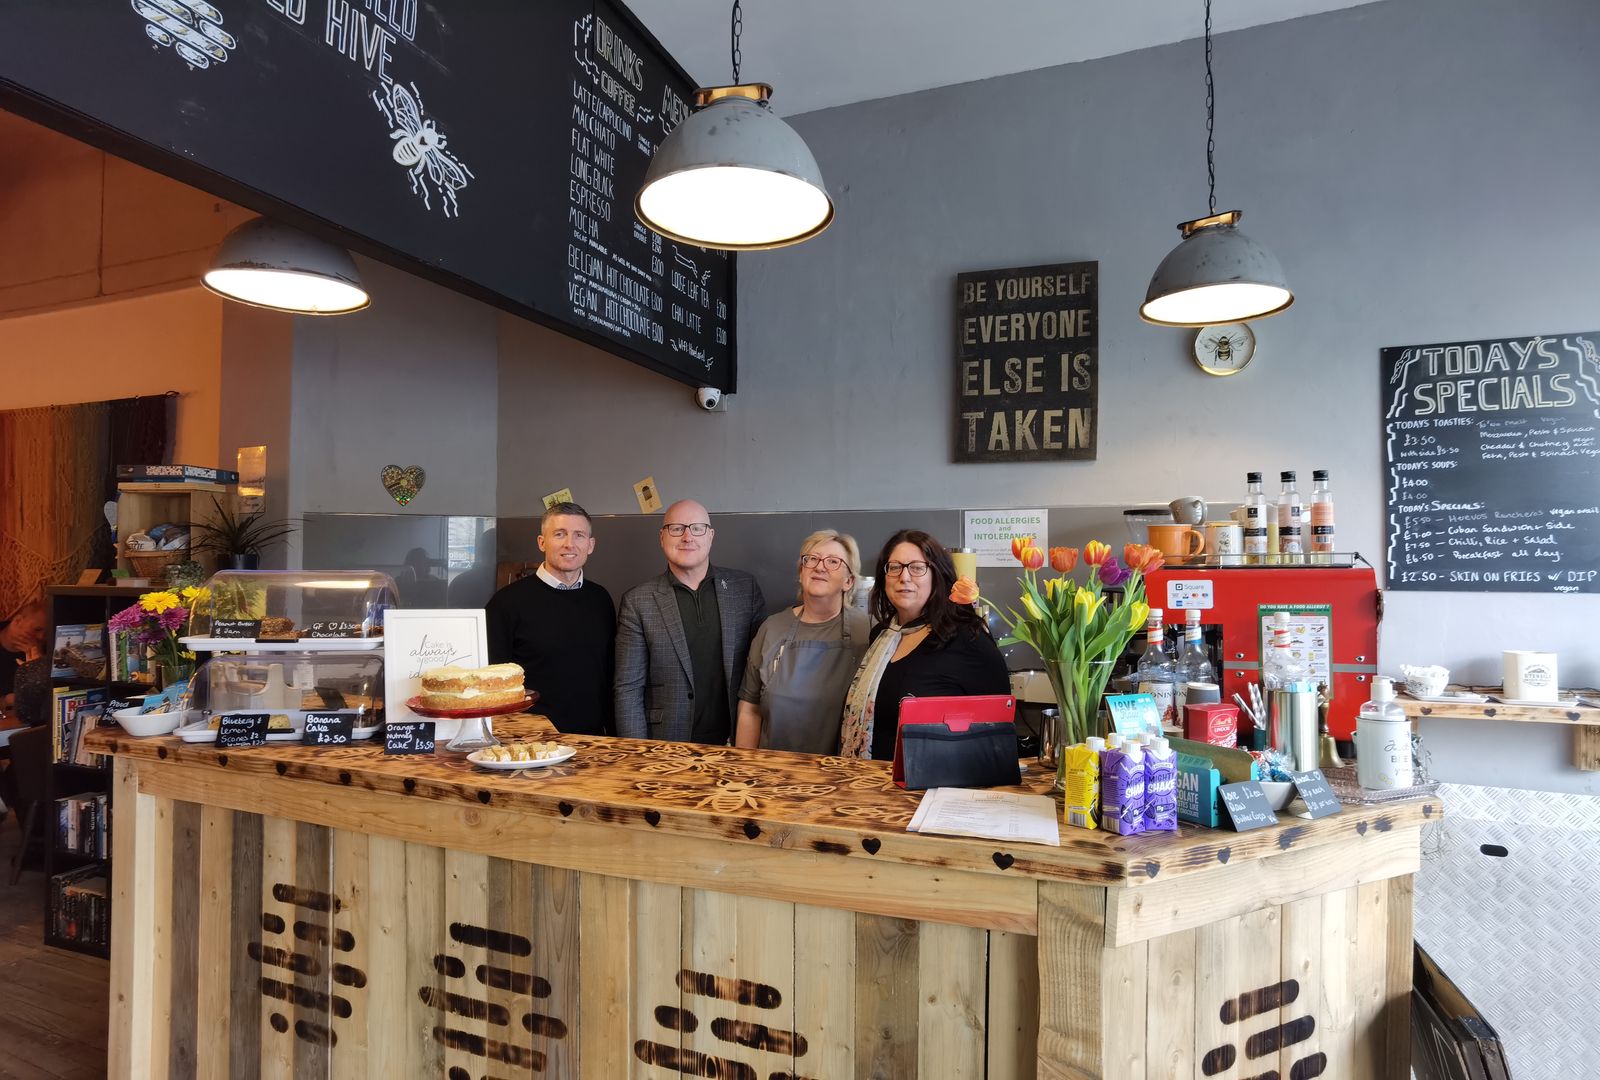 Hive Community Café helped by One Community Foundation